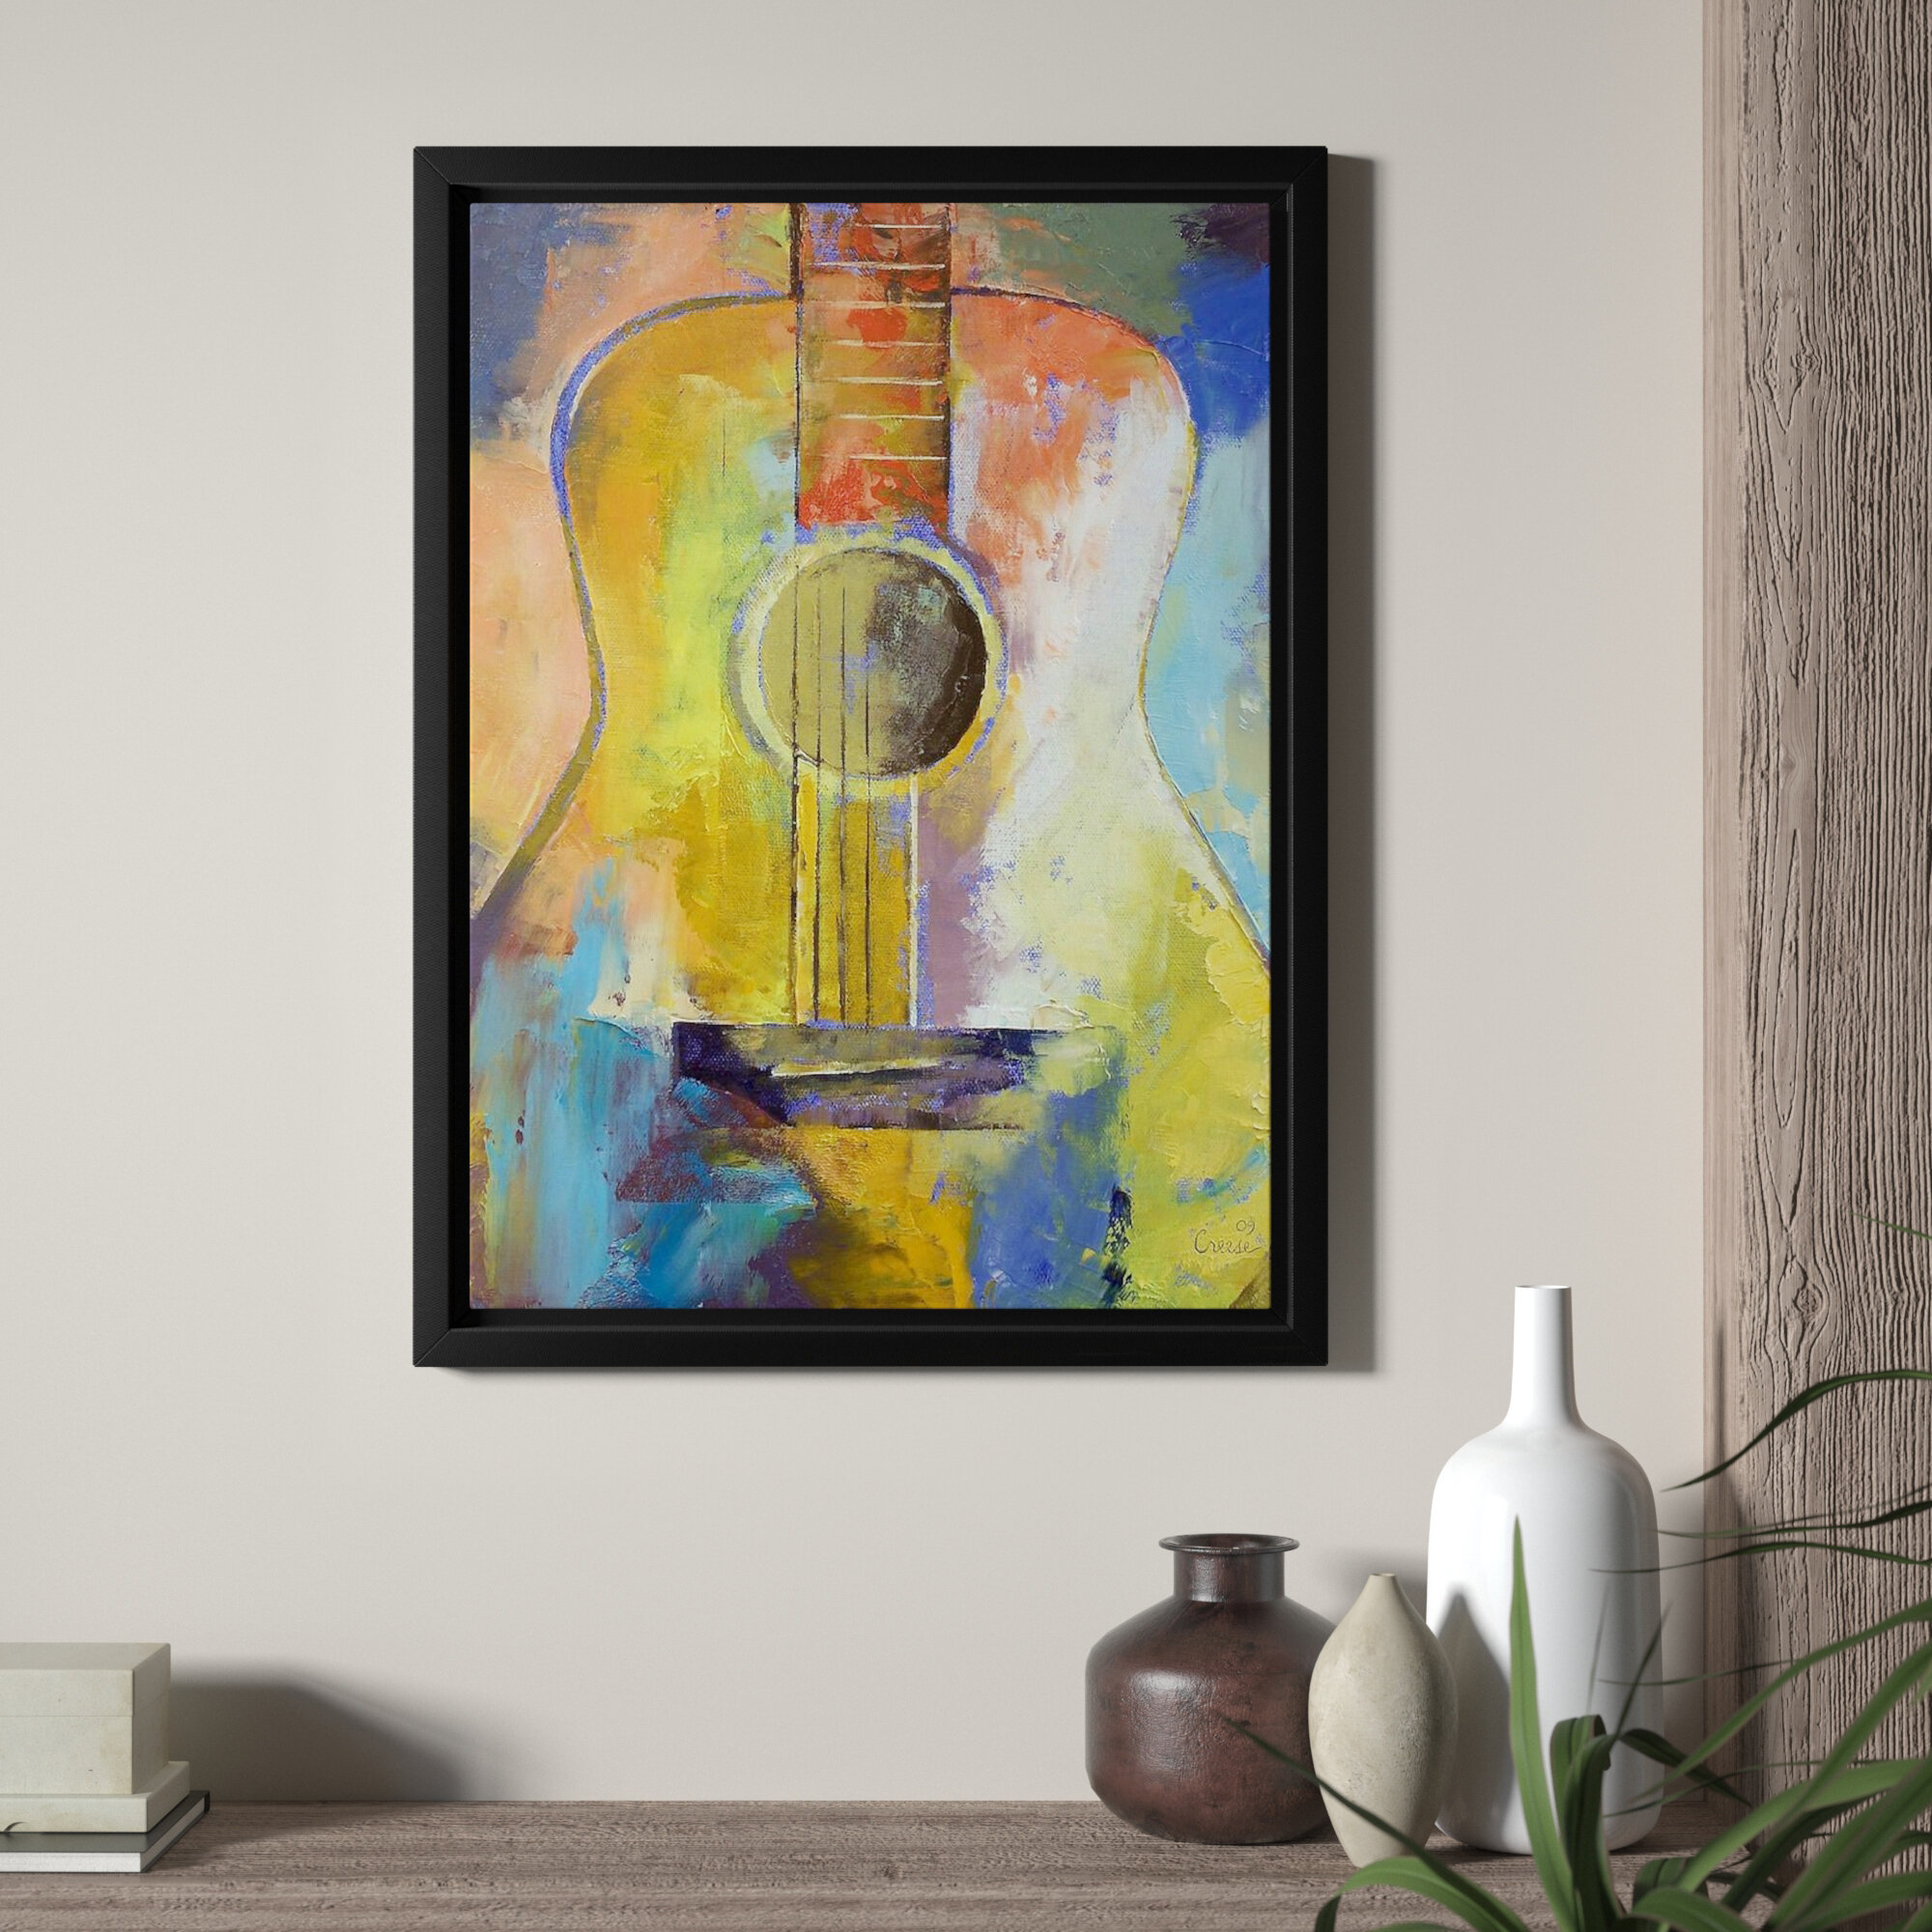 24 by 32 ArtWall Michael Creeses Acoustic Guitar Gallery Wrapped Floater Framed Canvas